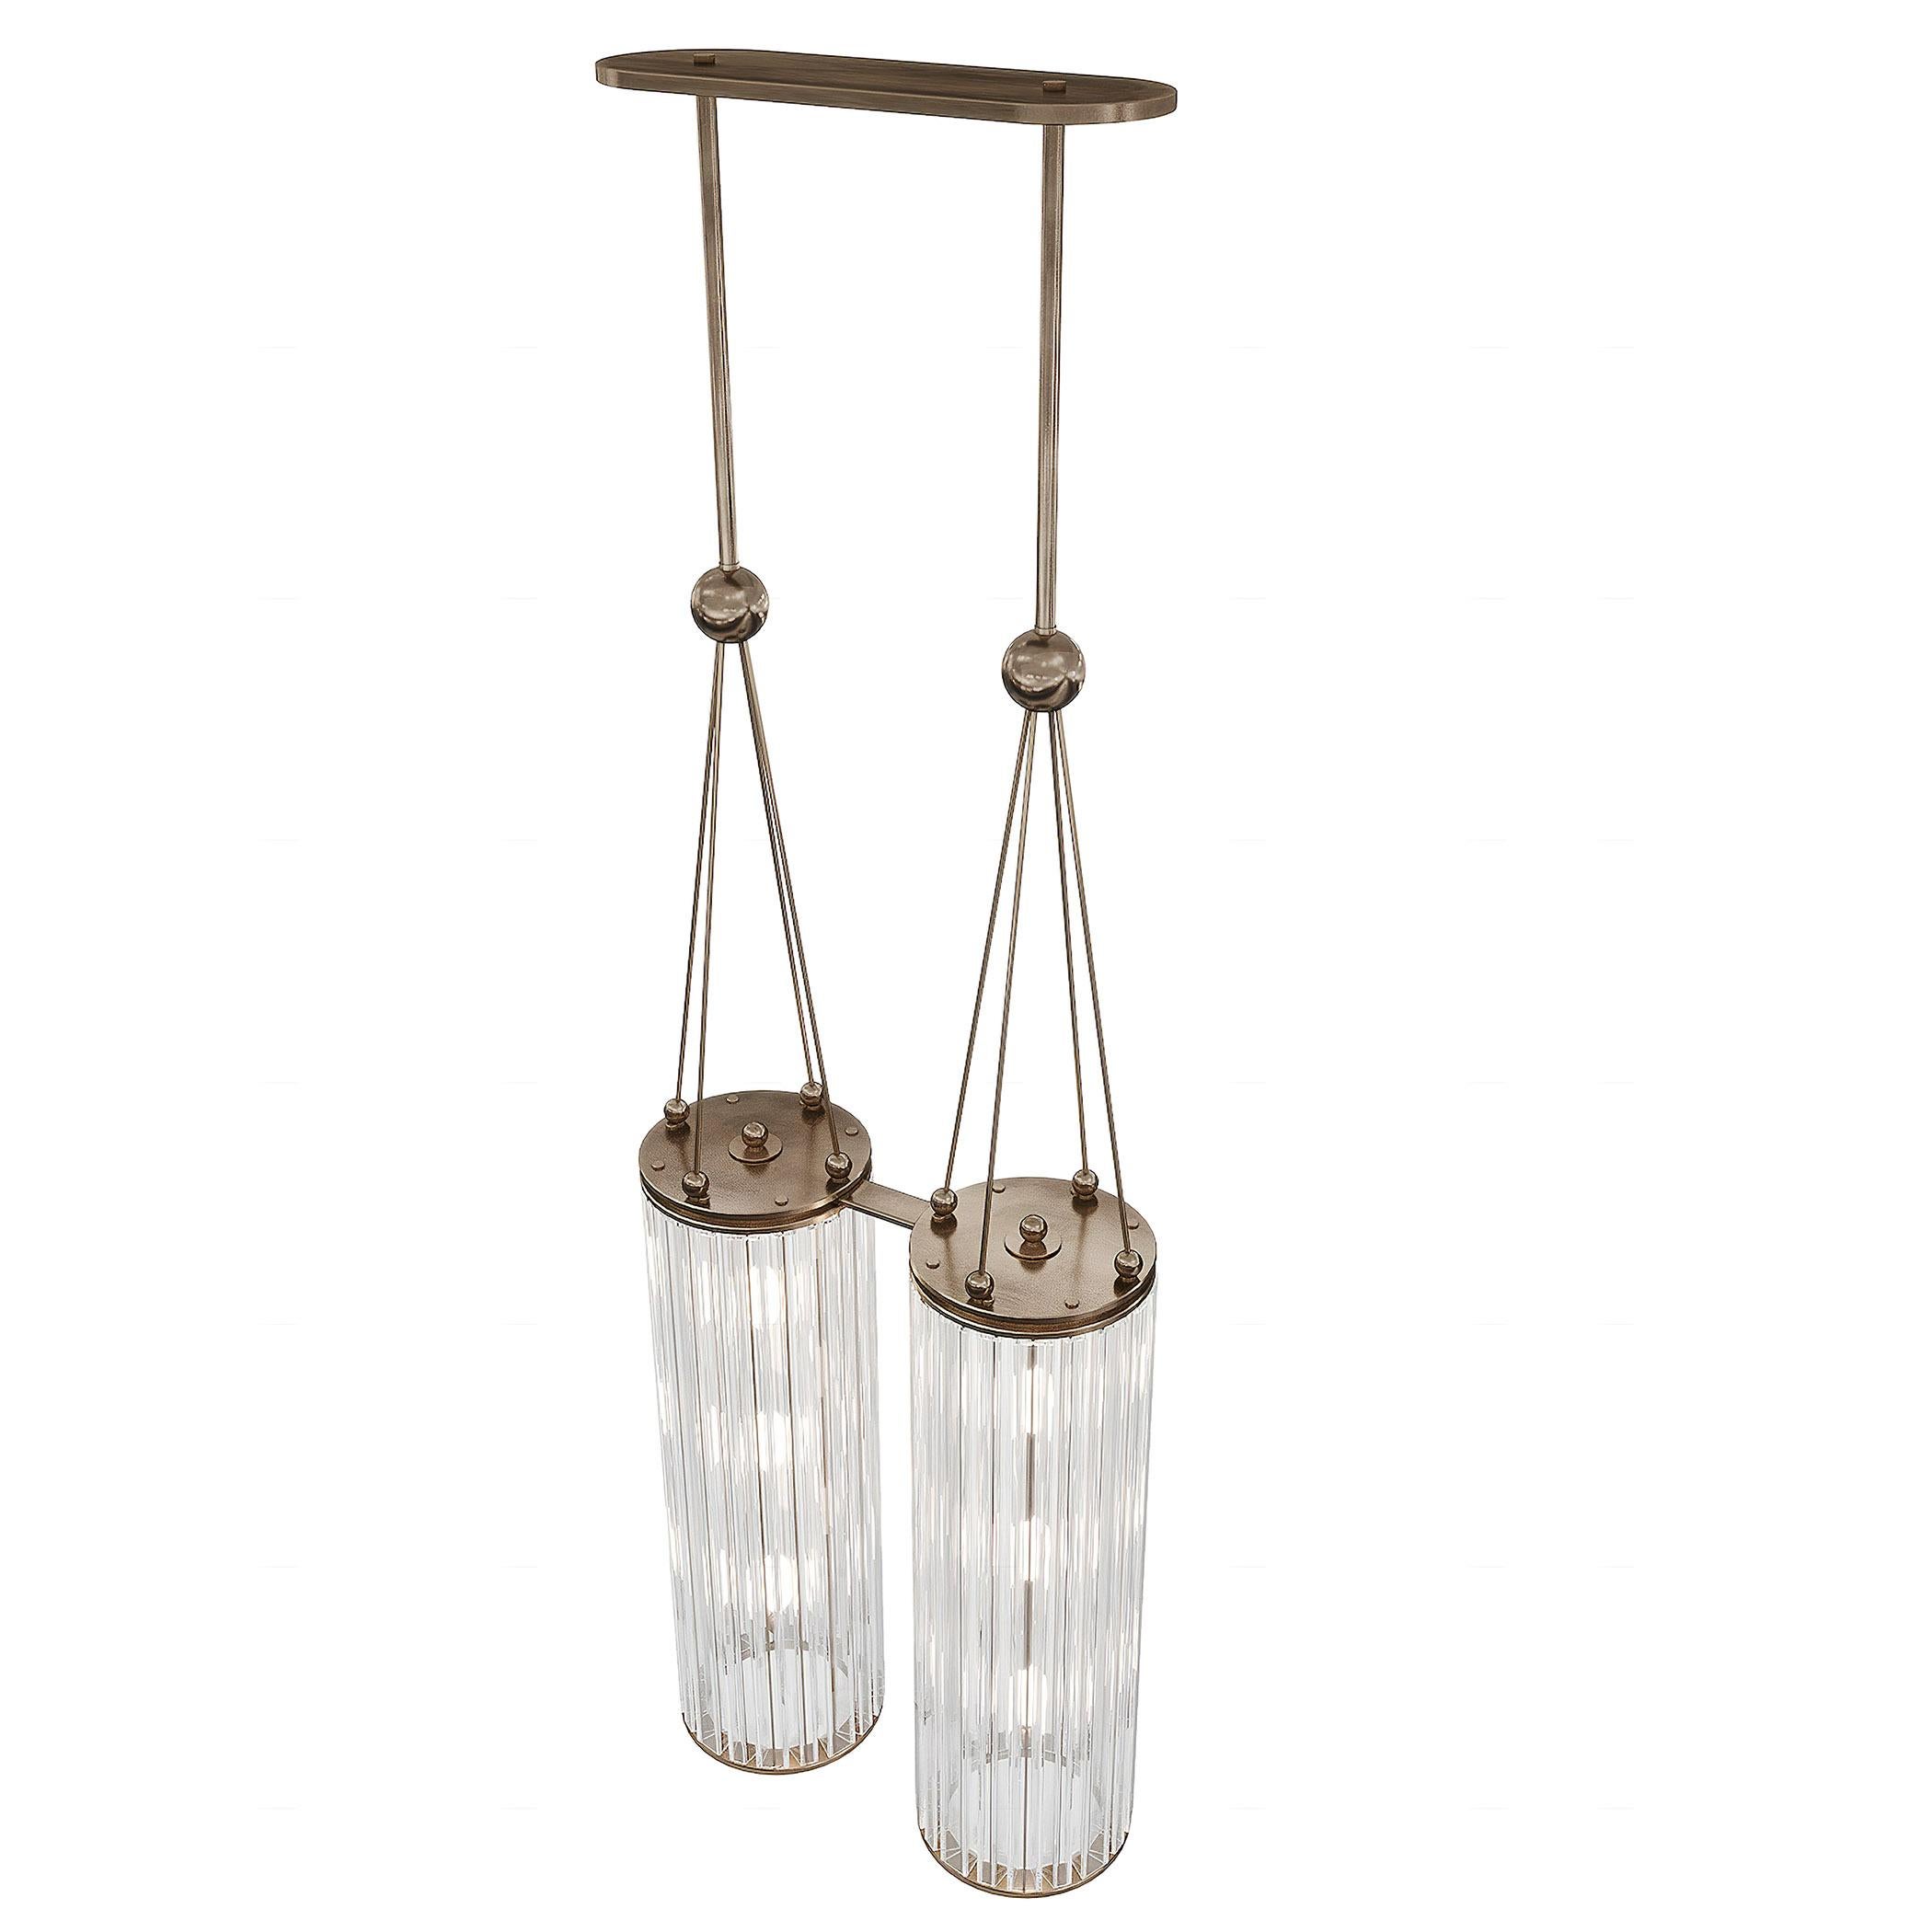 The ALTAIR II contemporary chandelier is the perfect piece for high-ceiling space, including atrium and staircases. The bearing metal structure is elegant and geometrical. All functional elements are hidden in metal bars and balls, that play the